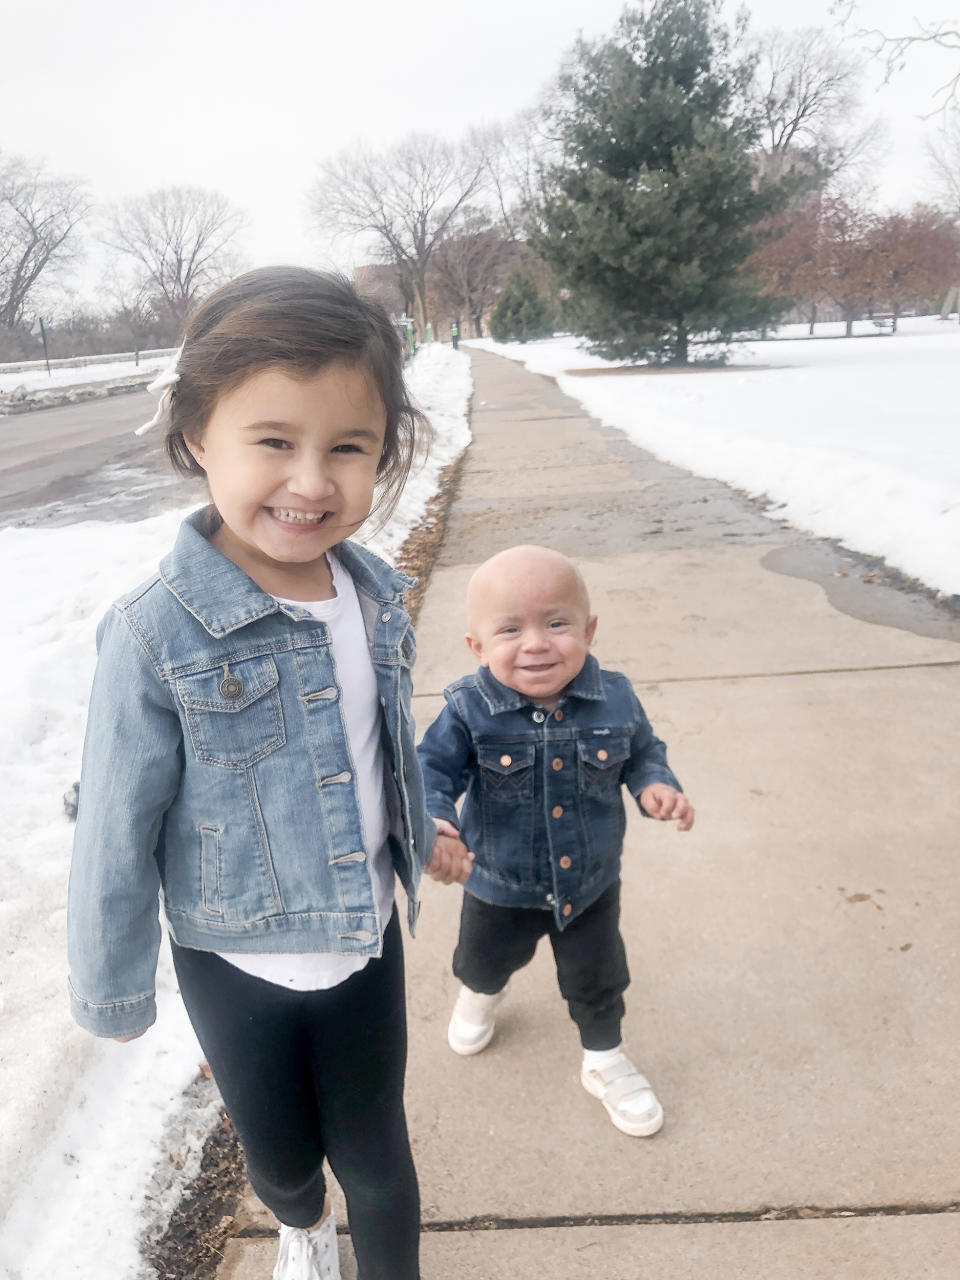 Olivia Vasquez holds her brother's hand during their stay in Minneapolis, Minnesota, last year where baby Eli received bone marrow donated by his sister. He lost his hair and suffered other side effects from chemotherapy necessary before the transplant. (Courtesy Vasquez family)